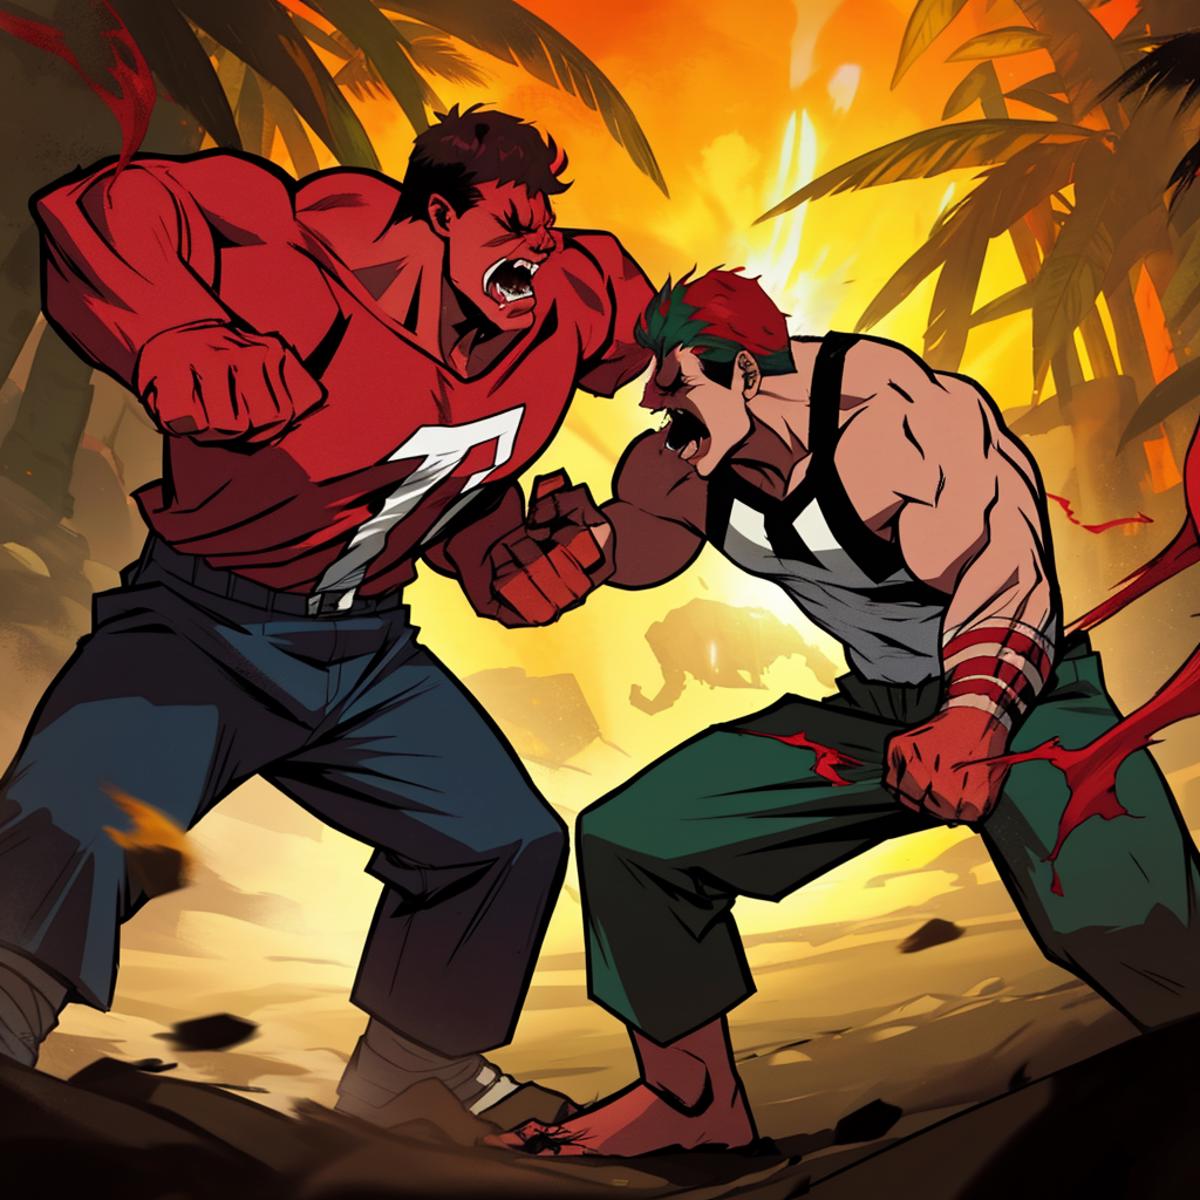 Fight scene image by mnemic